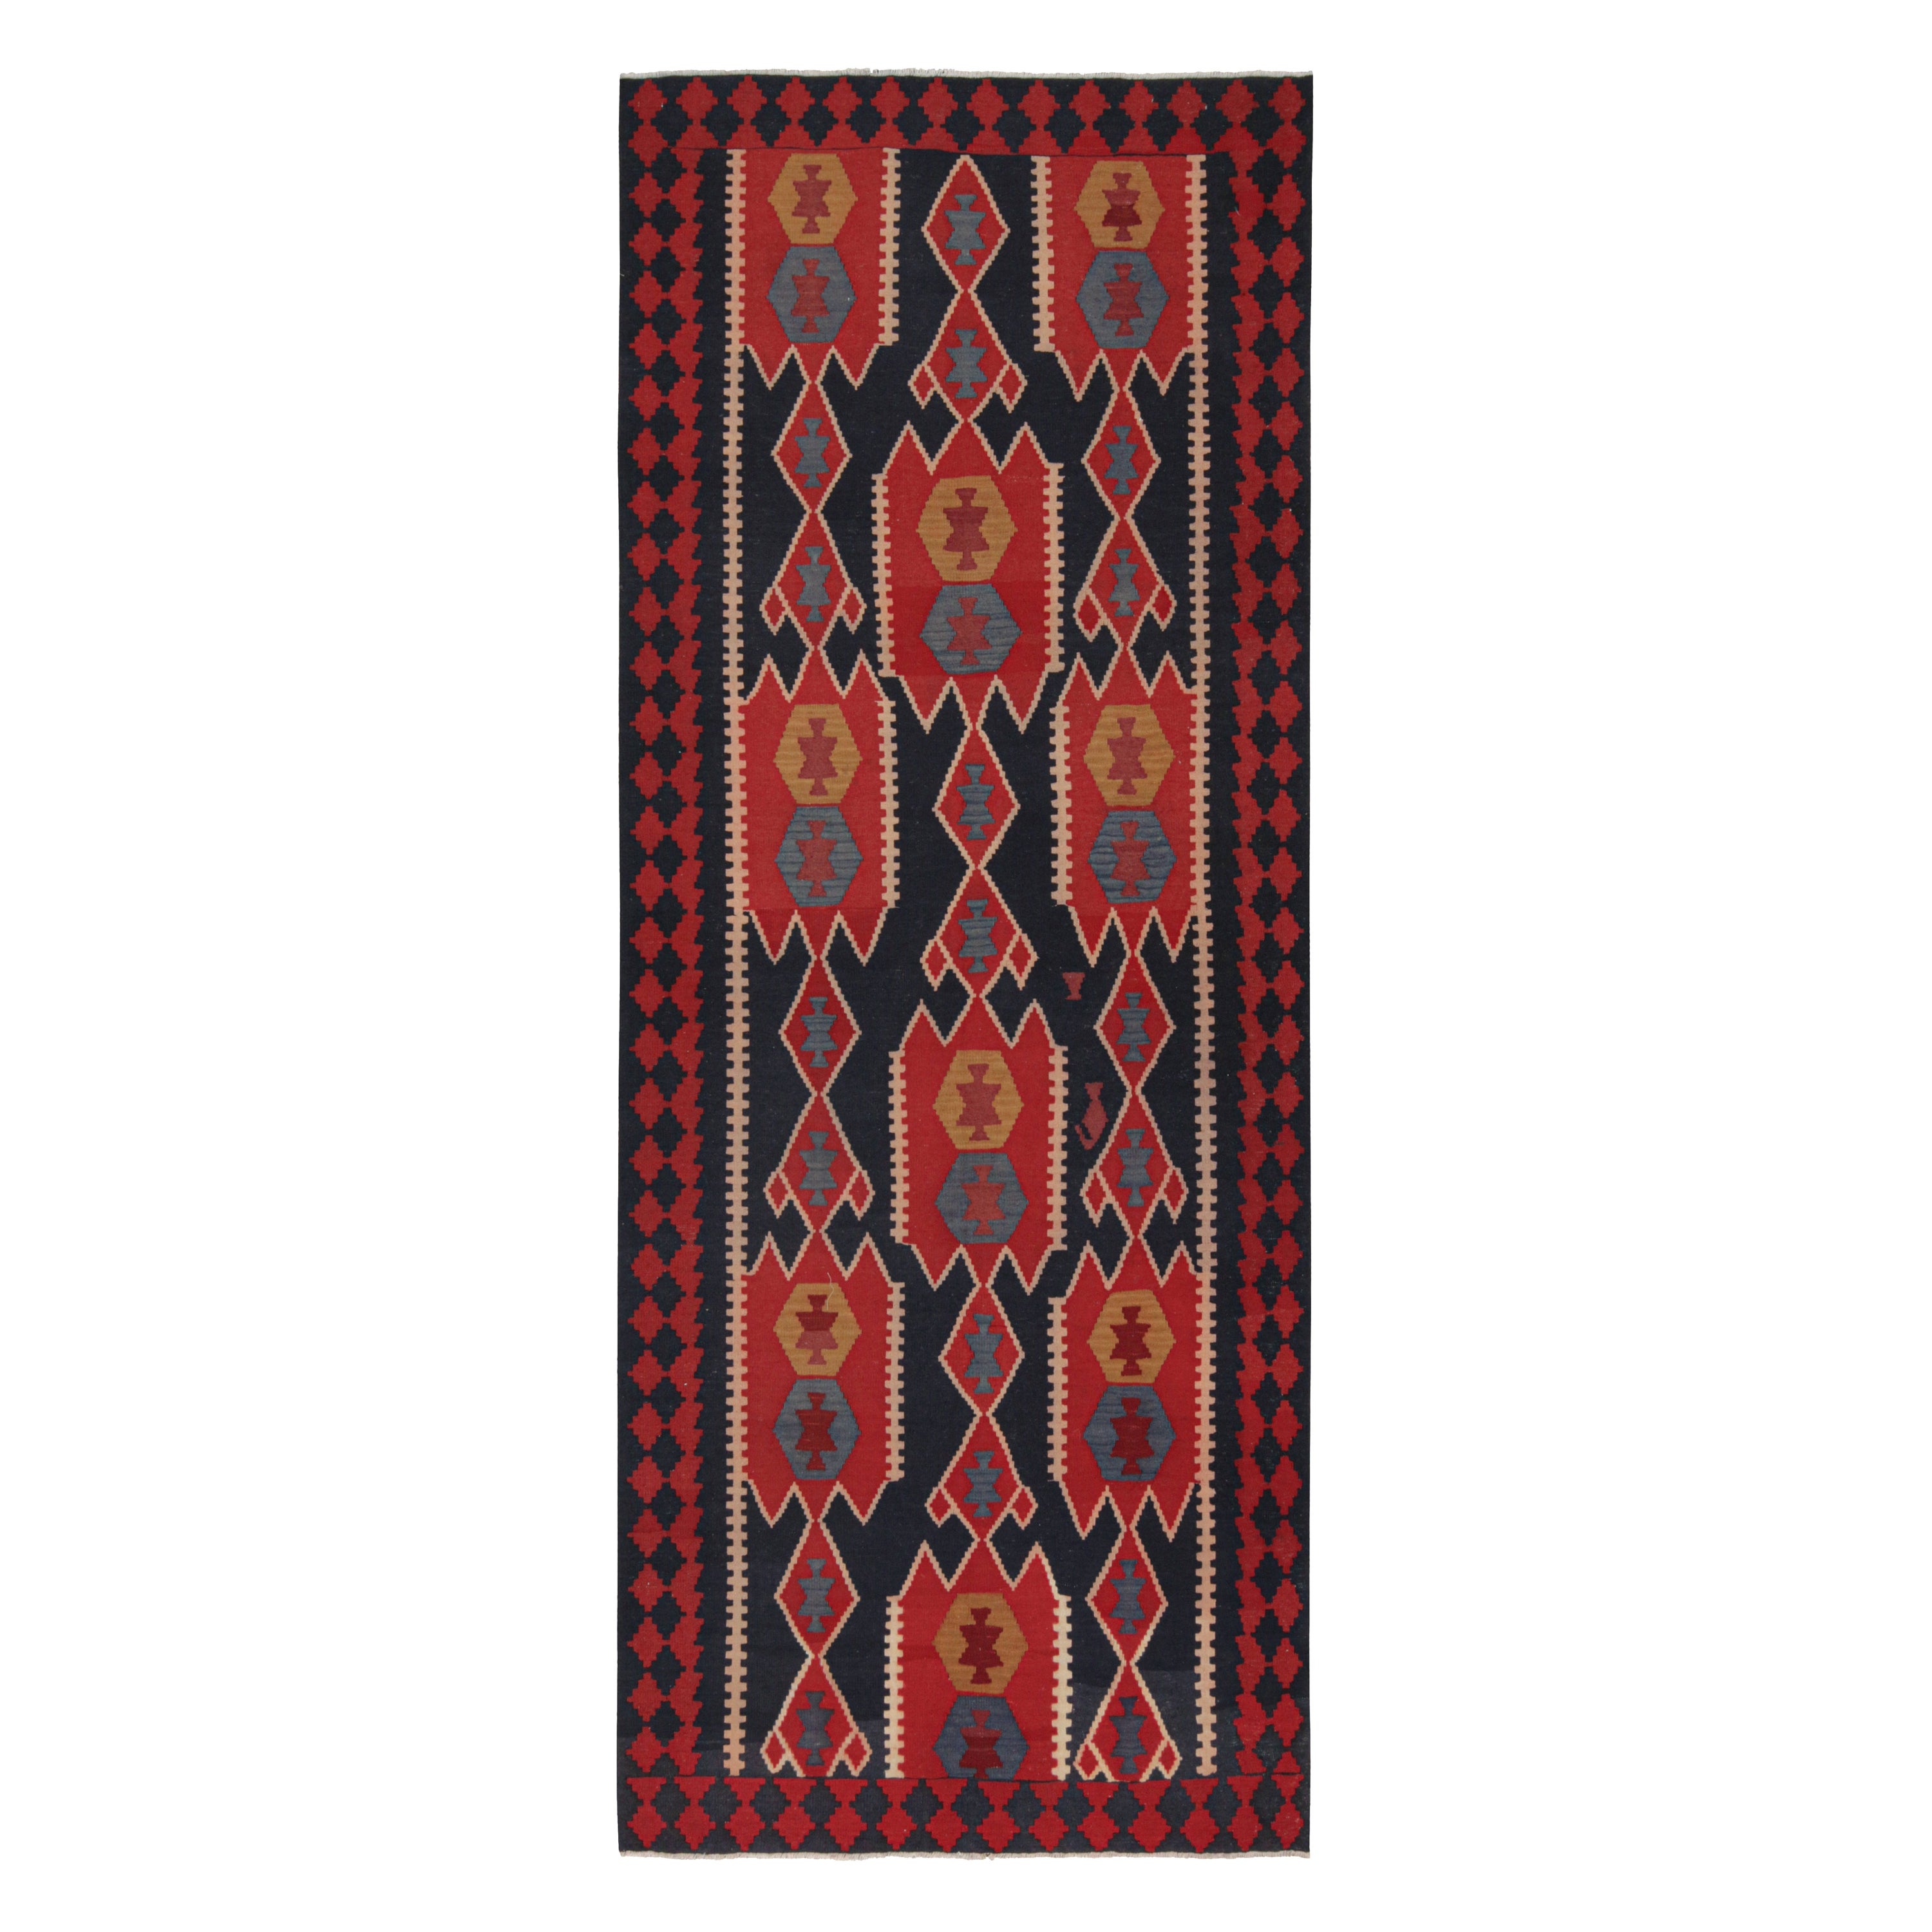 Vintage Persian Kilim in Navy Blue with Red Geometric Patterns by Rug & Kilim For Sale